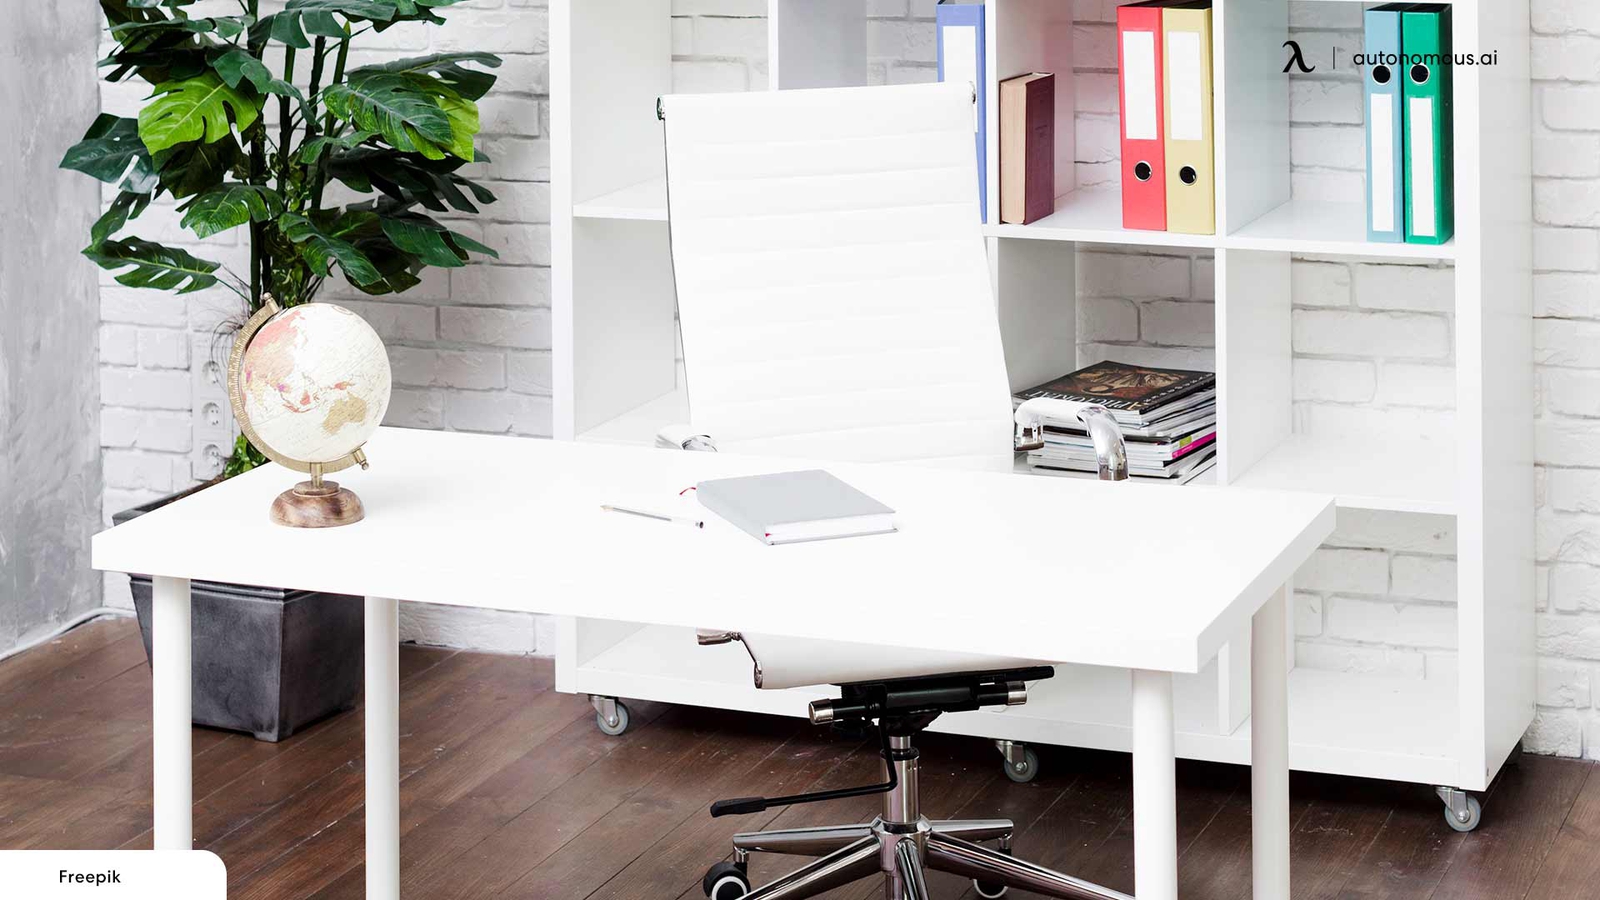 20 Adjustable Office Chairs That Make Your Office Ergonomic